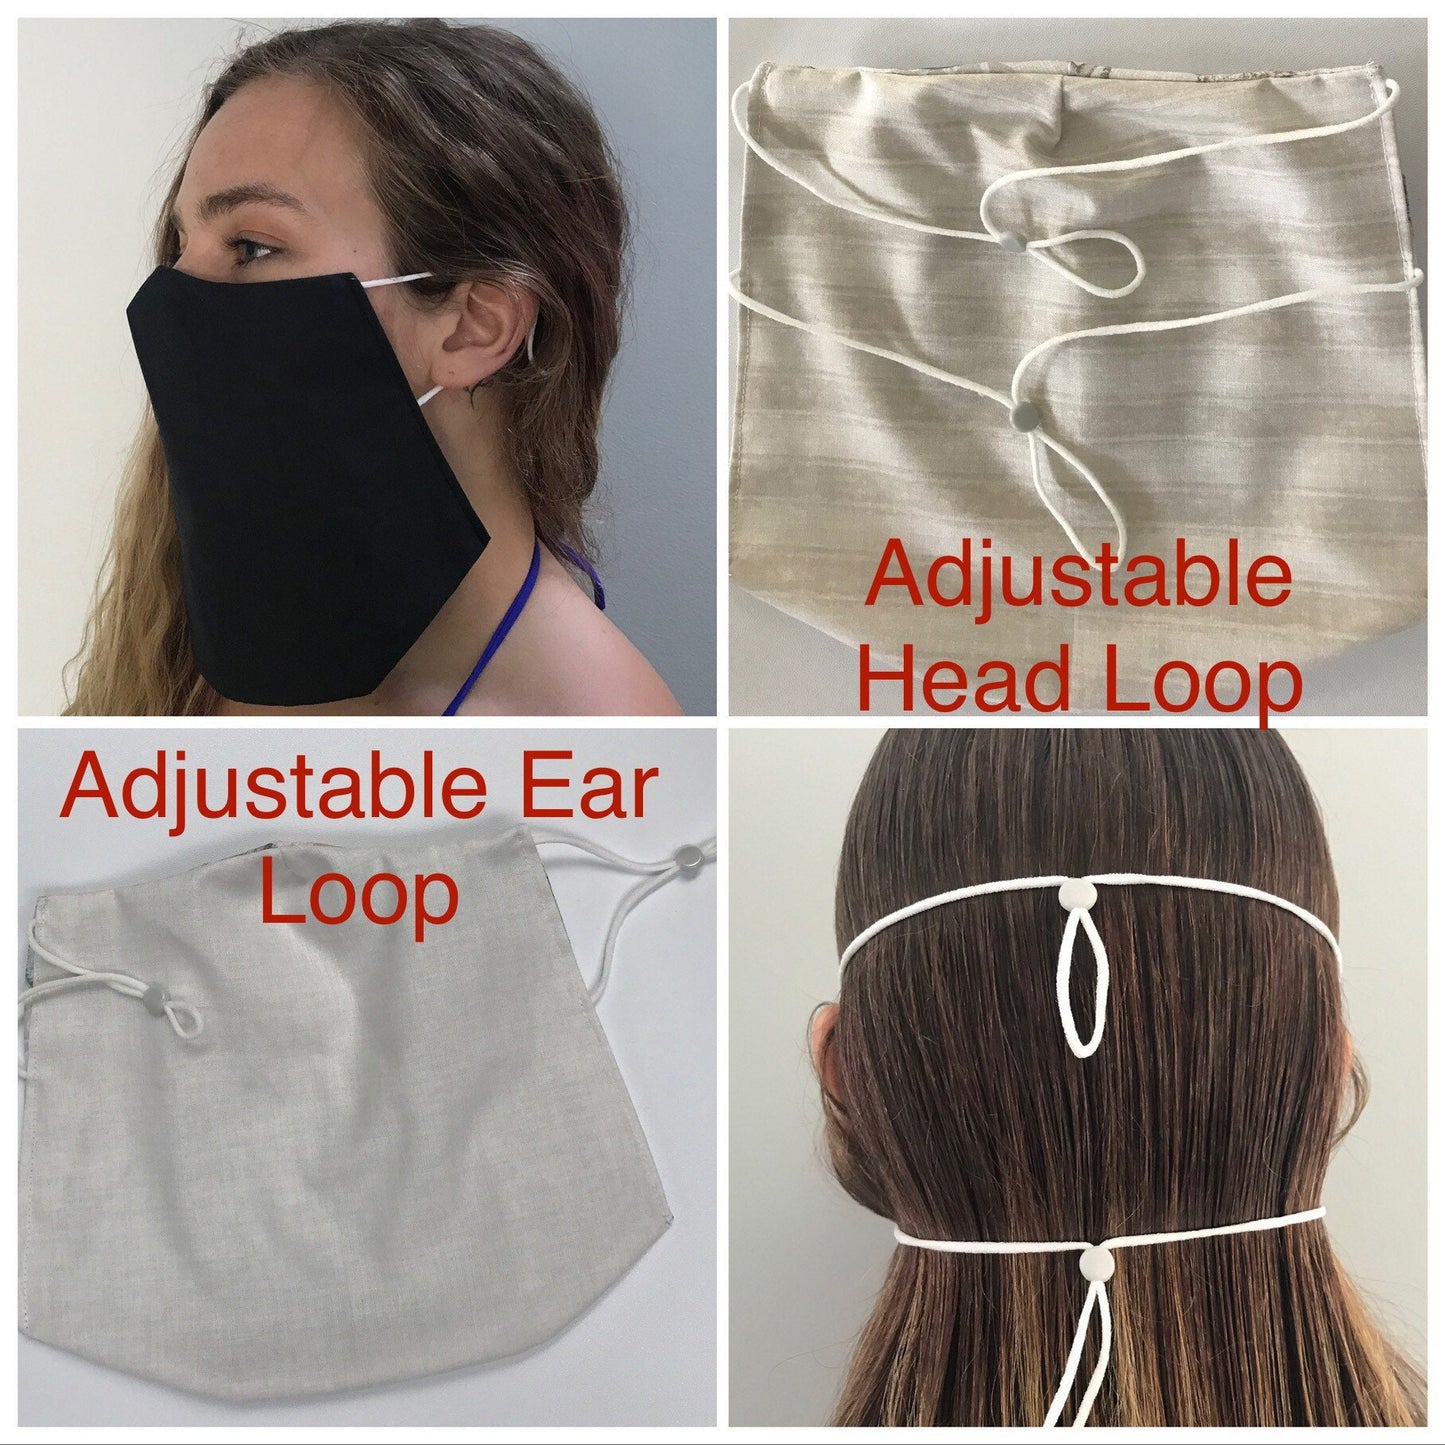 Veil open bottom face mask, Three layer protection, cool, comfortable and breathable. 8 Fabric Options. 100% Cotton. Washable. Made in USA